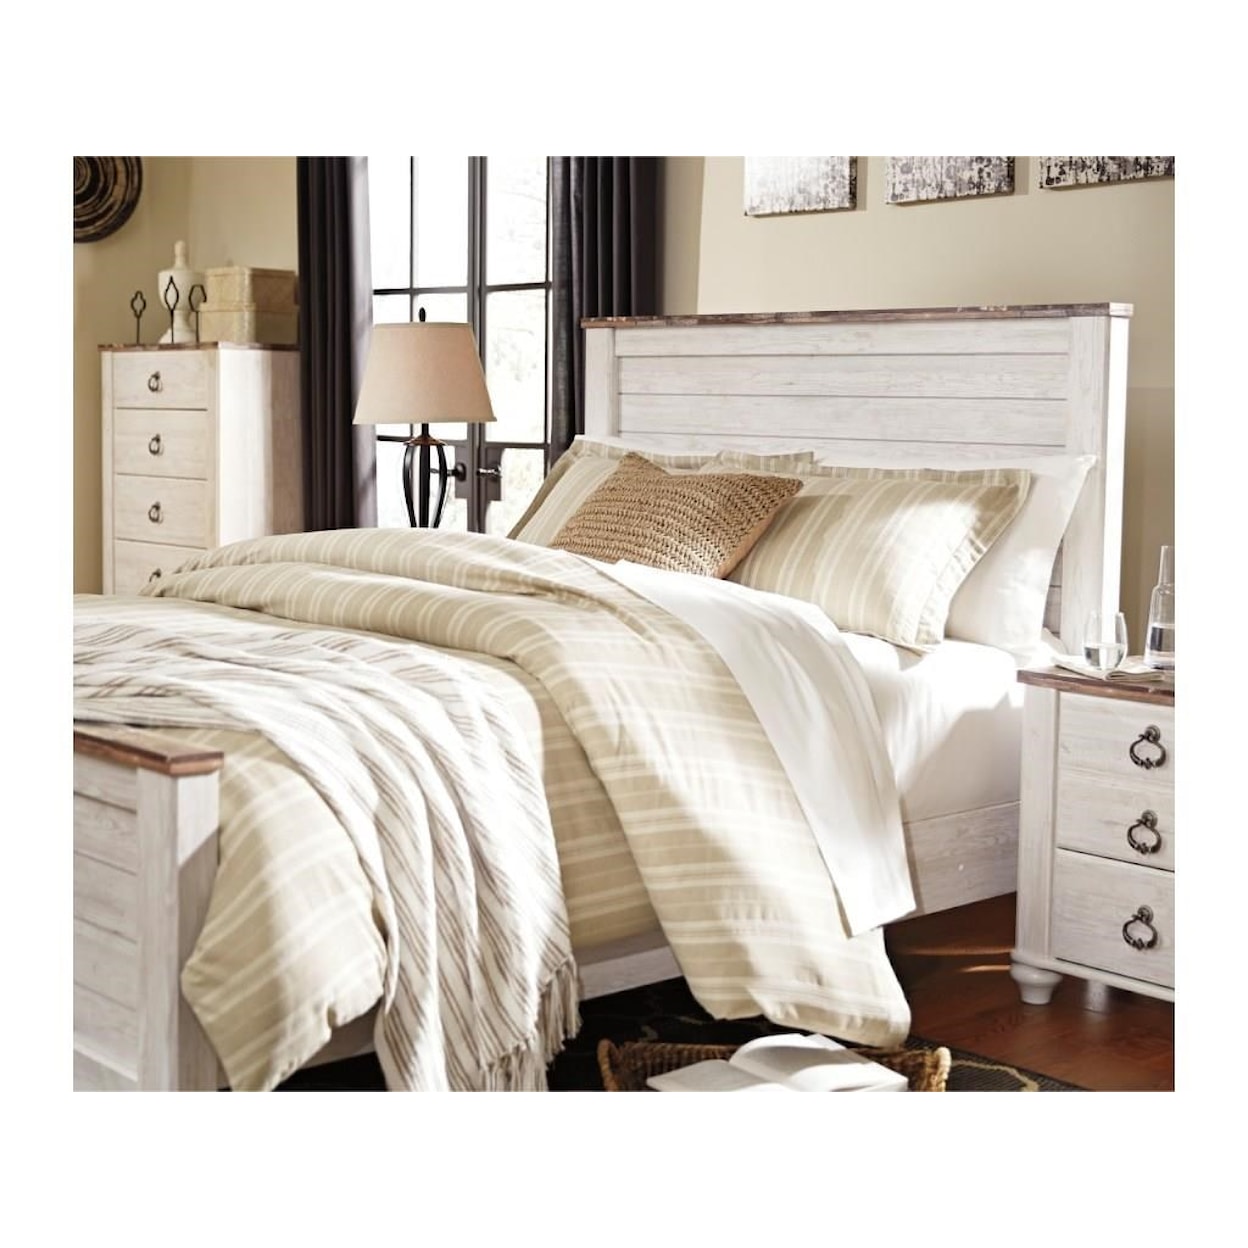 Signature Design by Ashley Willowton Queen 5 Piece Bedroom Group